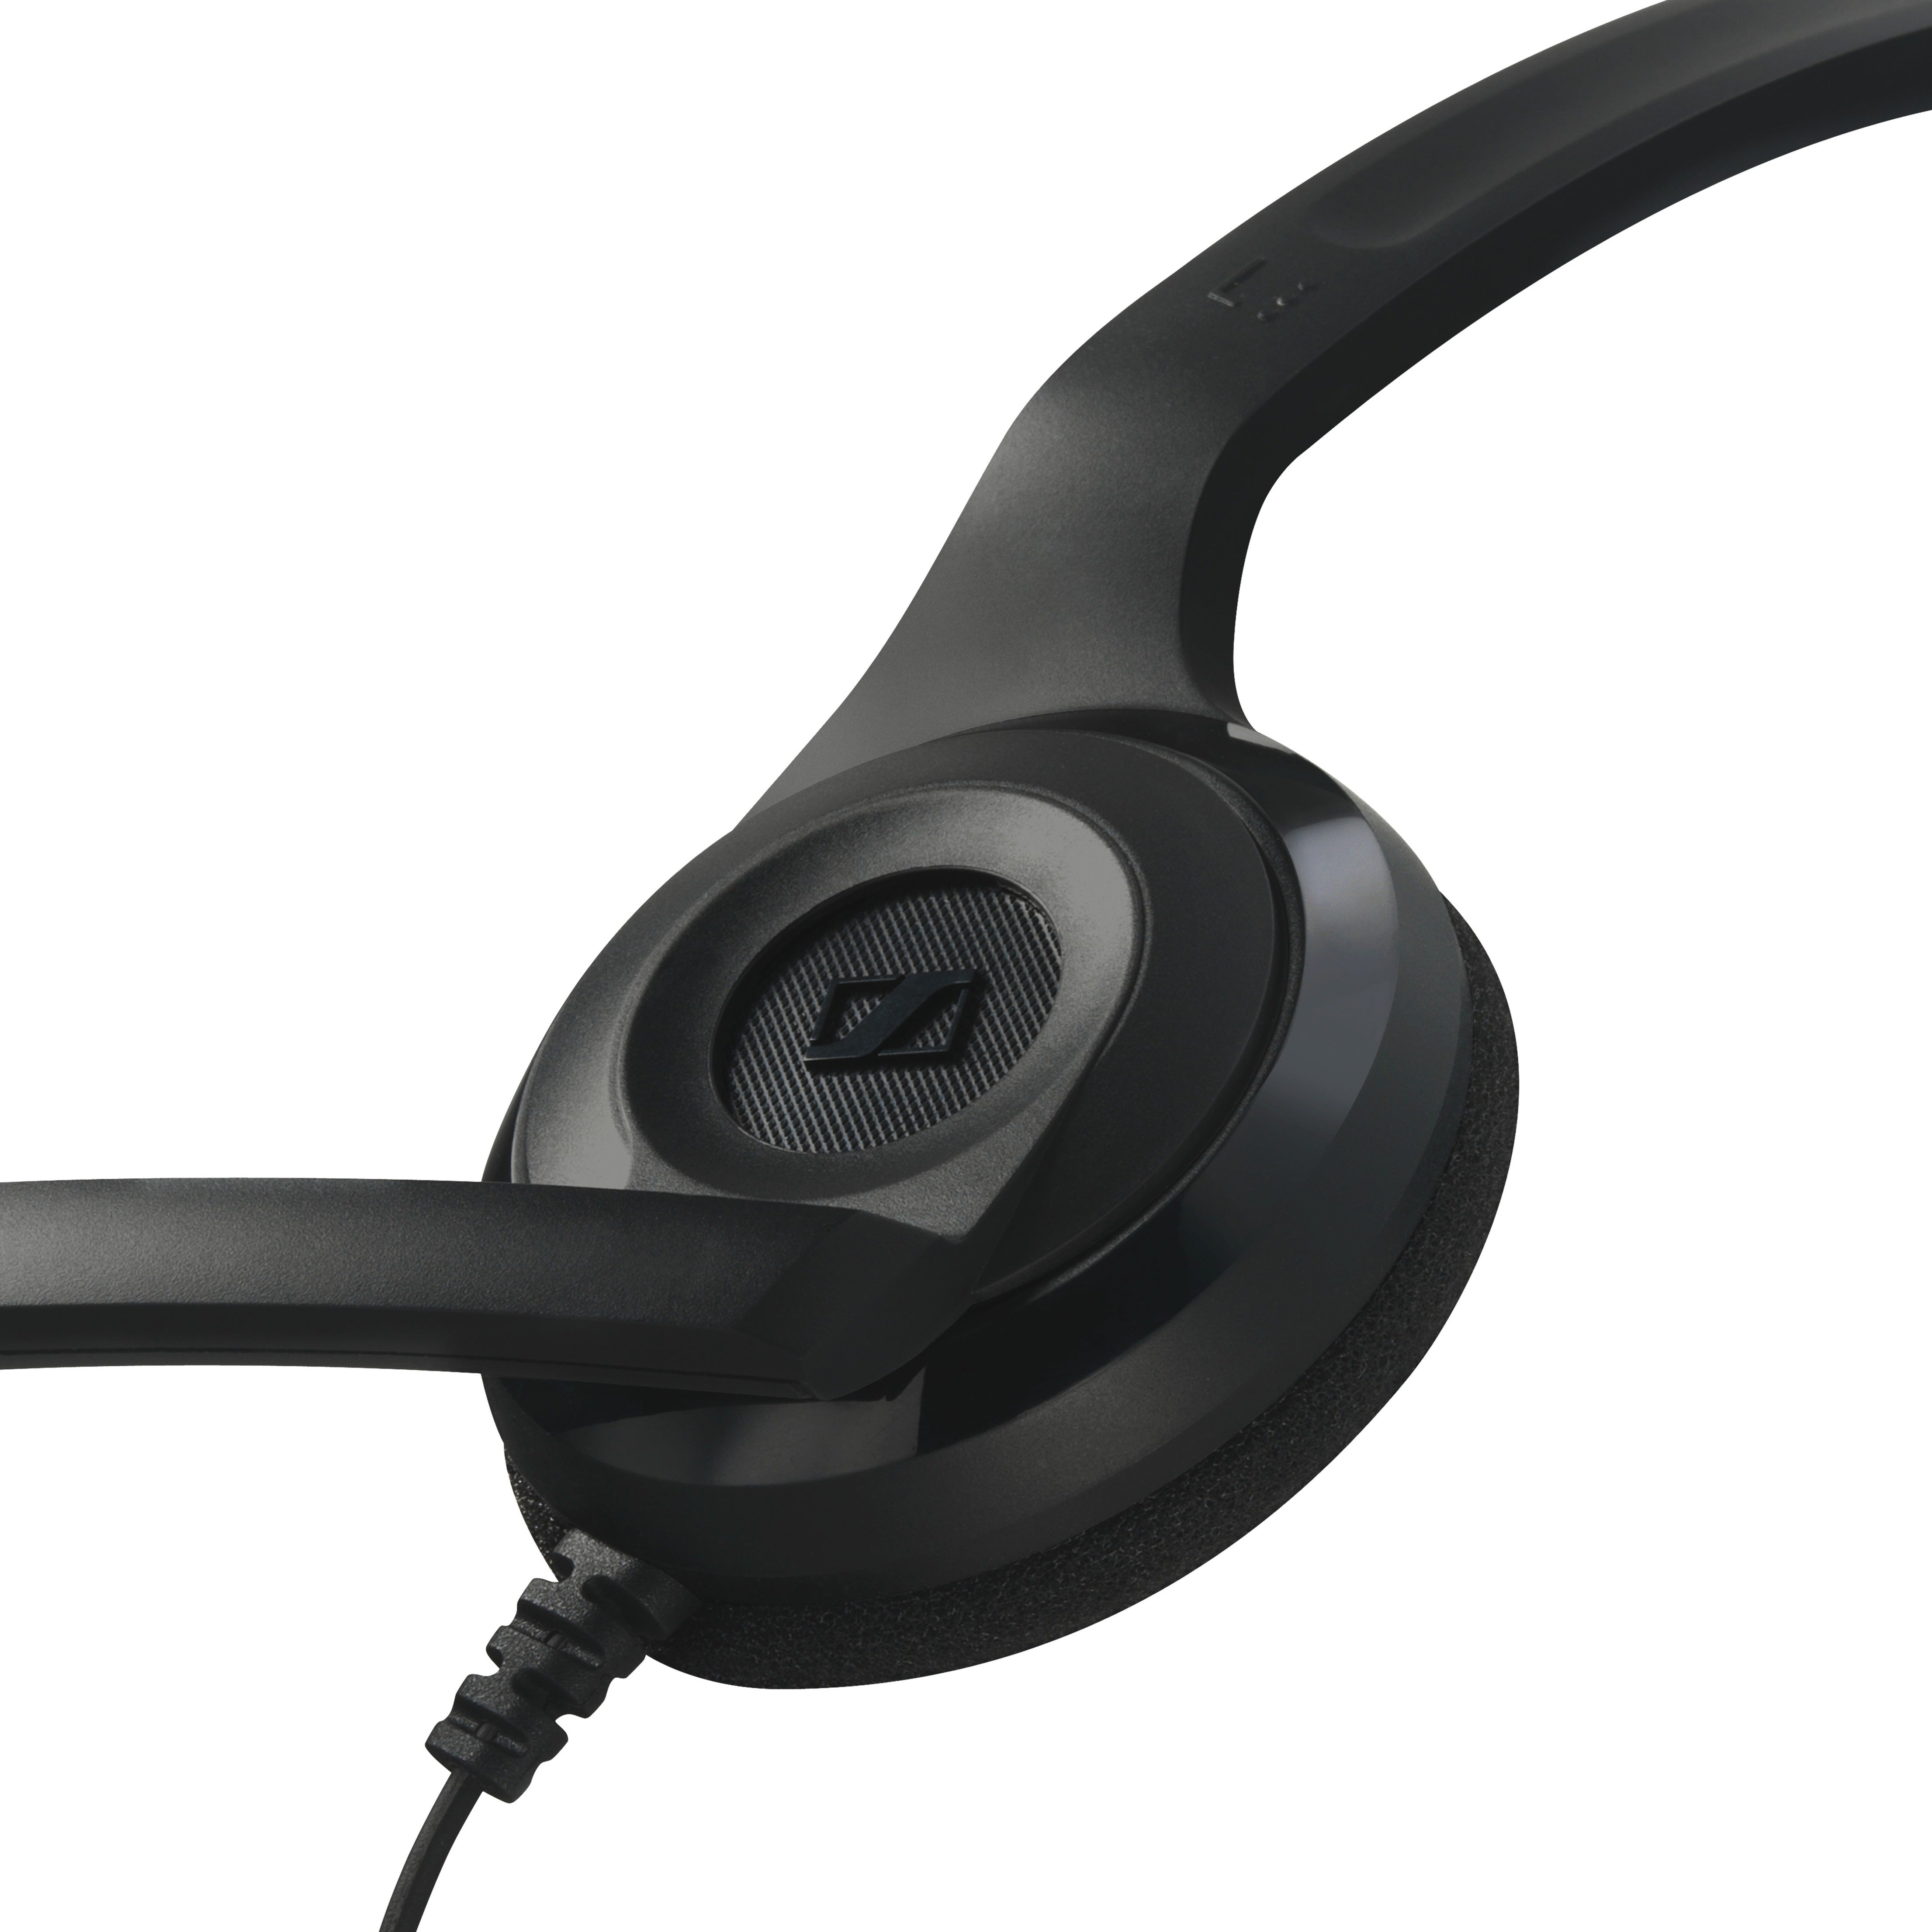 EPOS | SENNHEISER 504194 PC 2 Chat Headset, Lightweight On-ear Mono Headset with Noise Cancelling Microphone